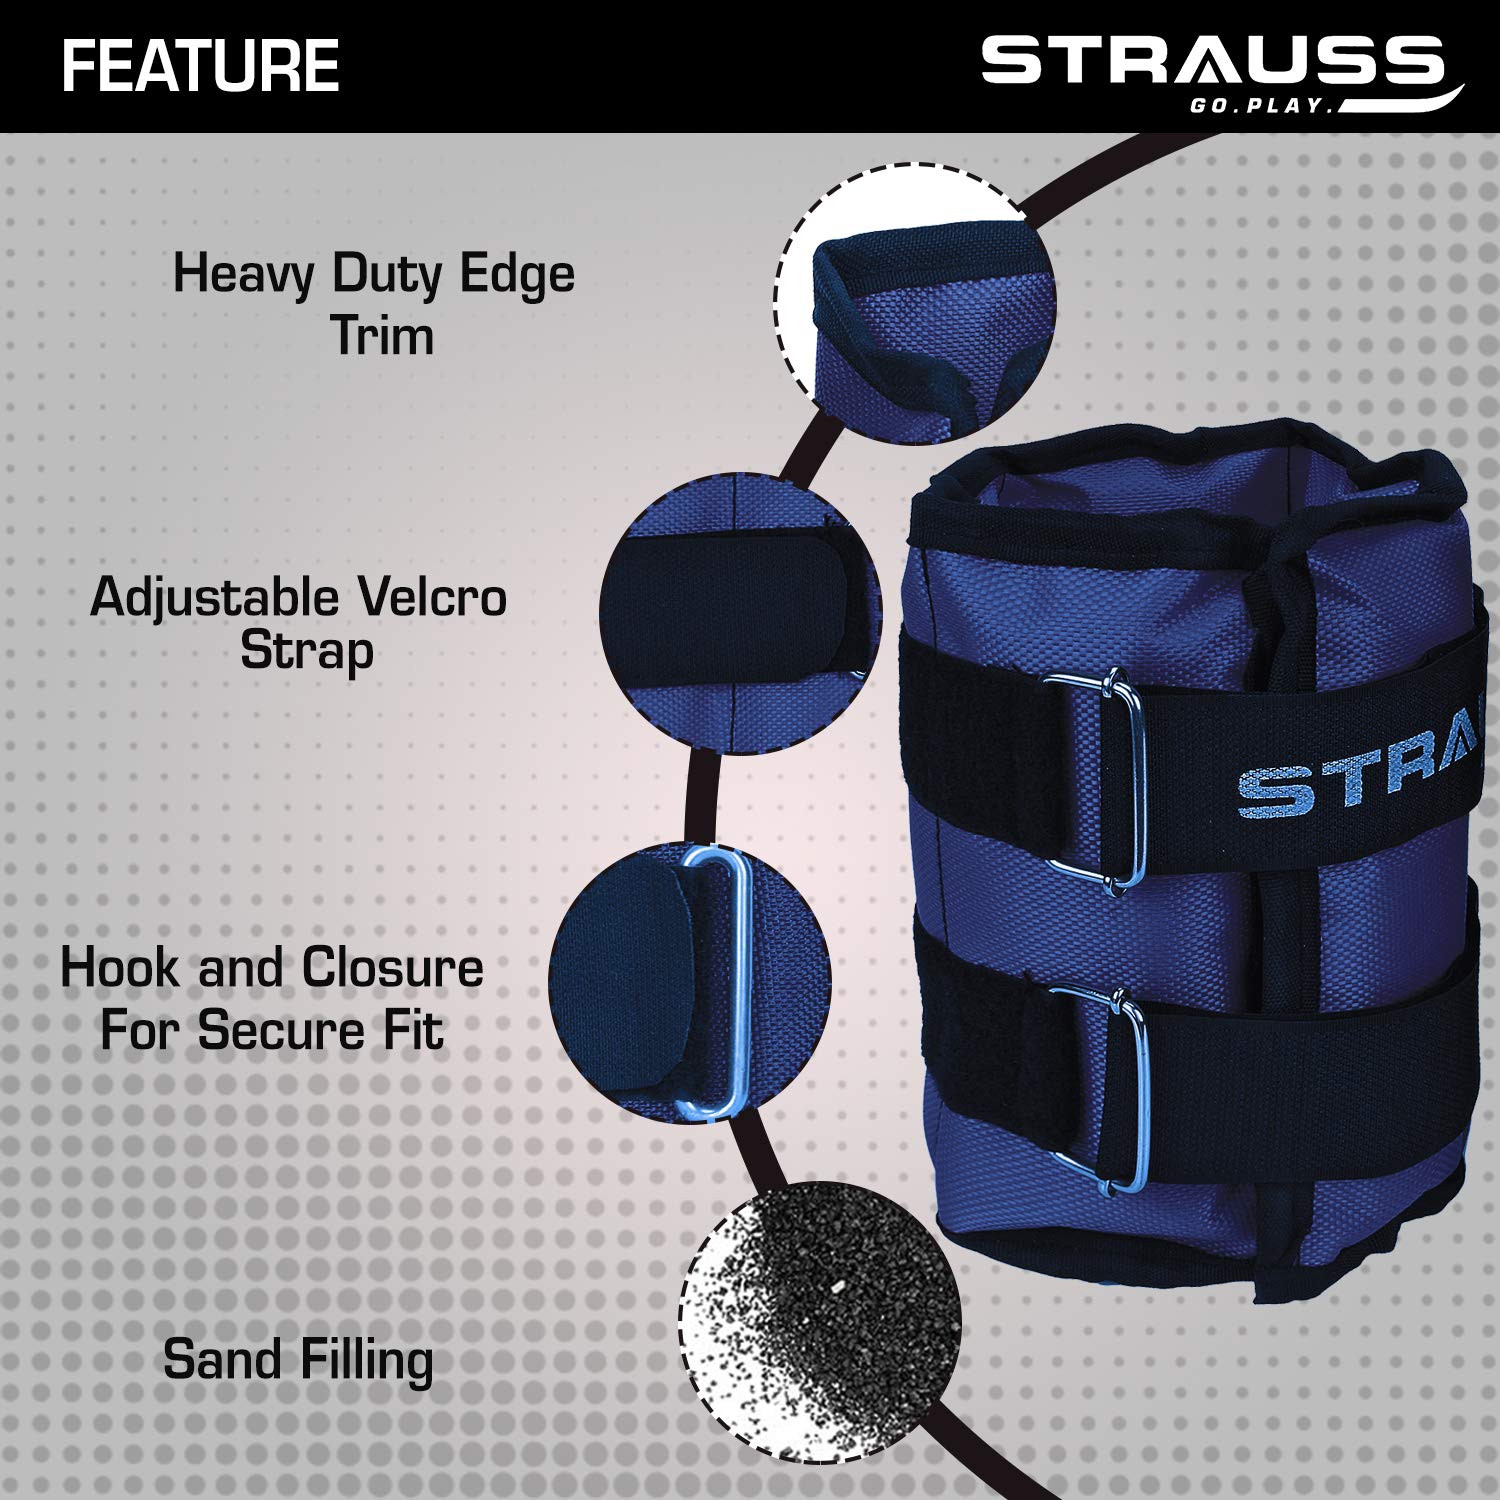 Strauss Adjustable Ankle/Wrist Weights 2 KG X 2 | Ideal for Walking, Running, Jogging, Cycling, Gym, Workout & Strength Training | Easy to Use on Ankle, Wrist, Leg, (Blue)